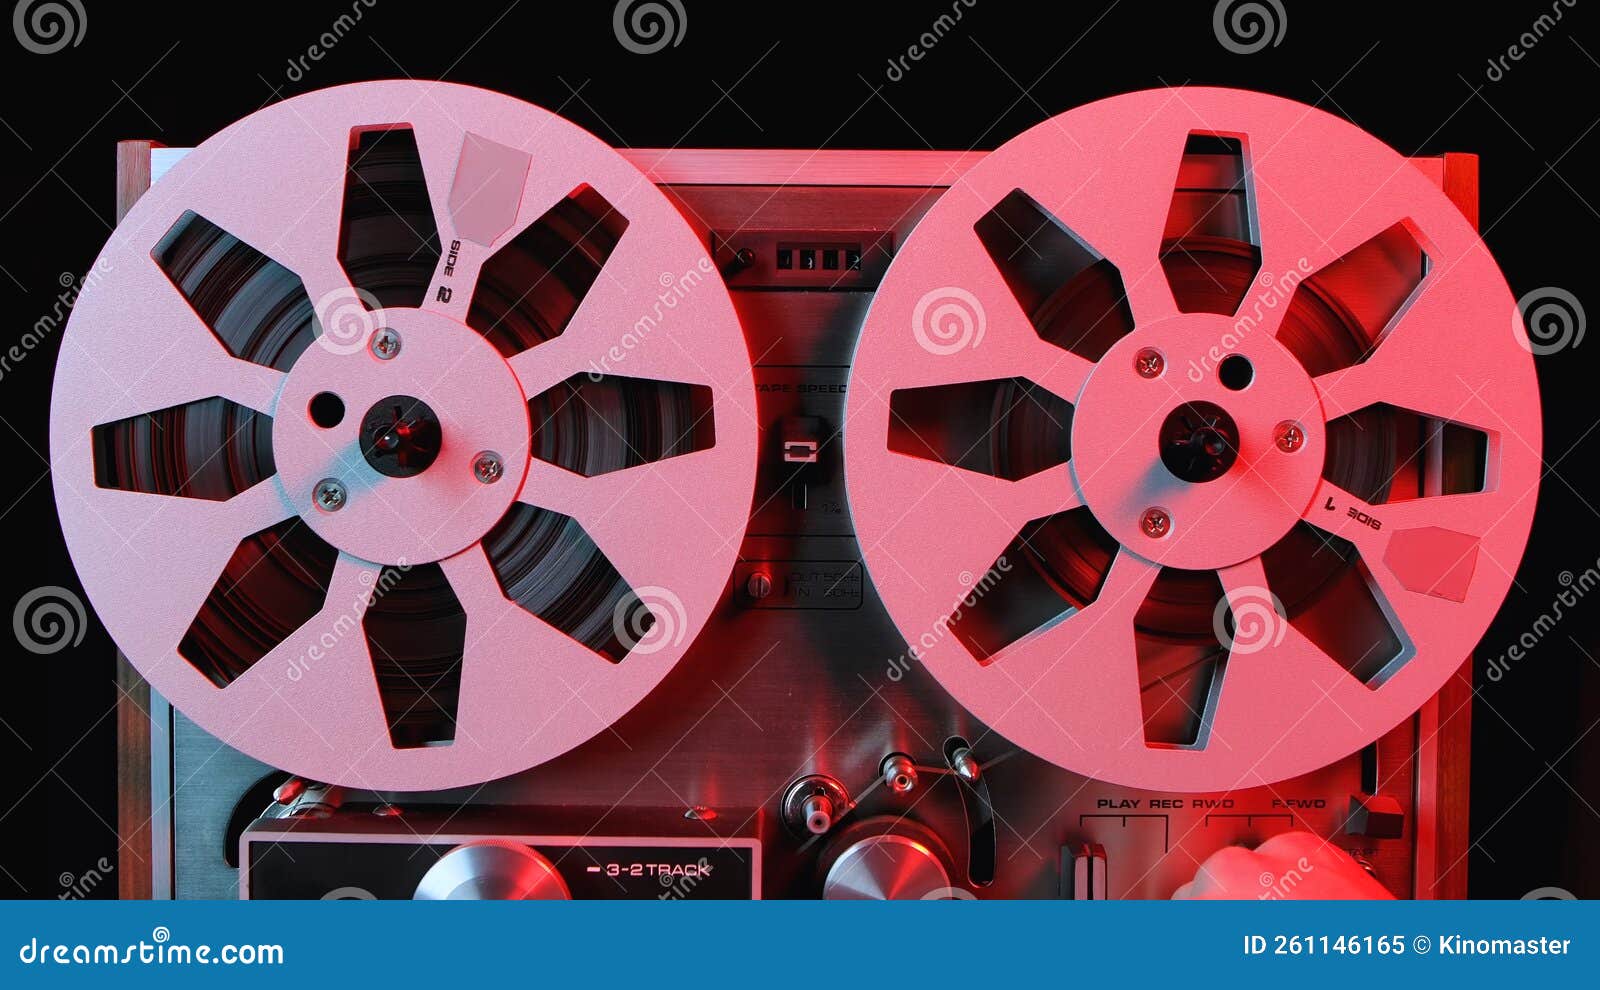 Reel To Reel Tape Recorder Illuminated by Red Light. Close Up of